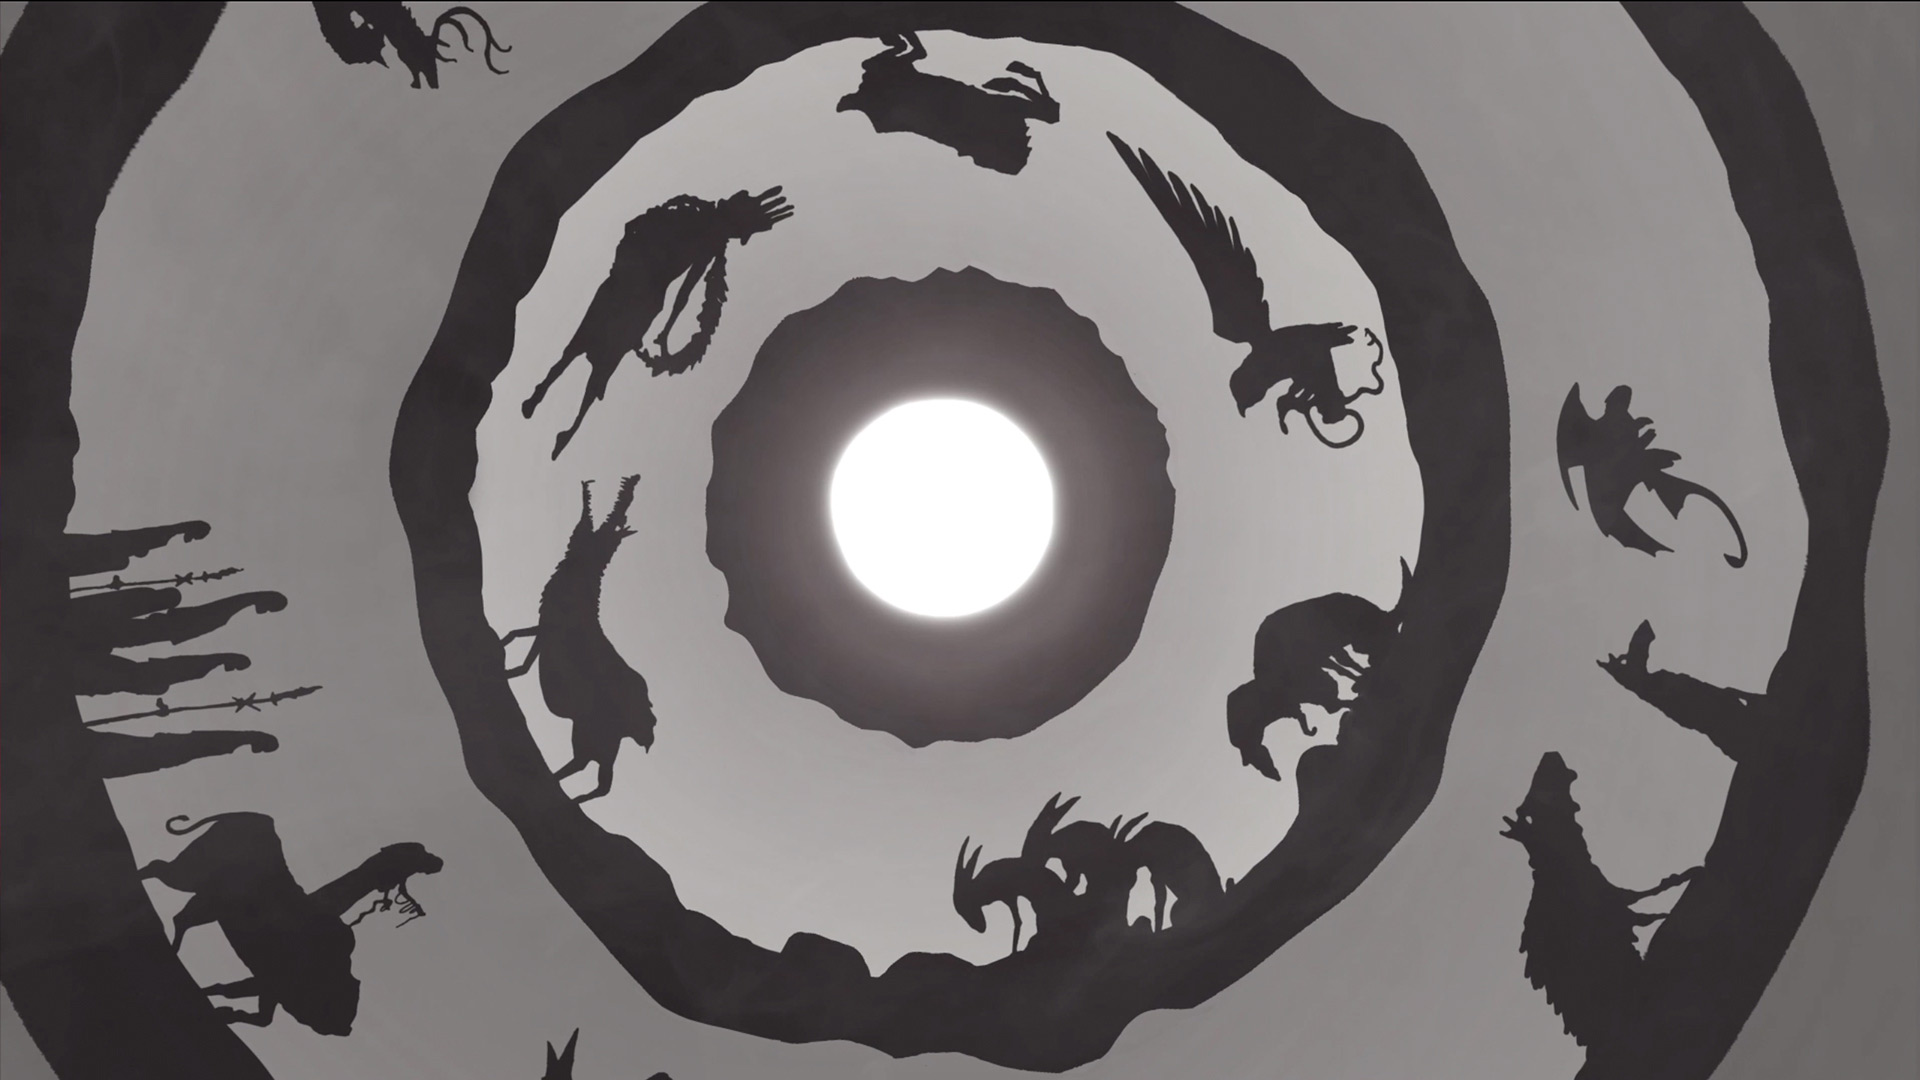 Sunwheel visual; shadowed creatures and people walking in a circular loop with moon in the centre